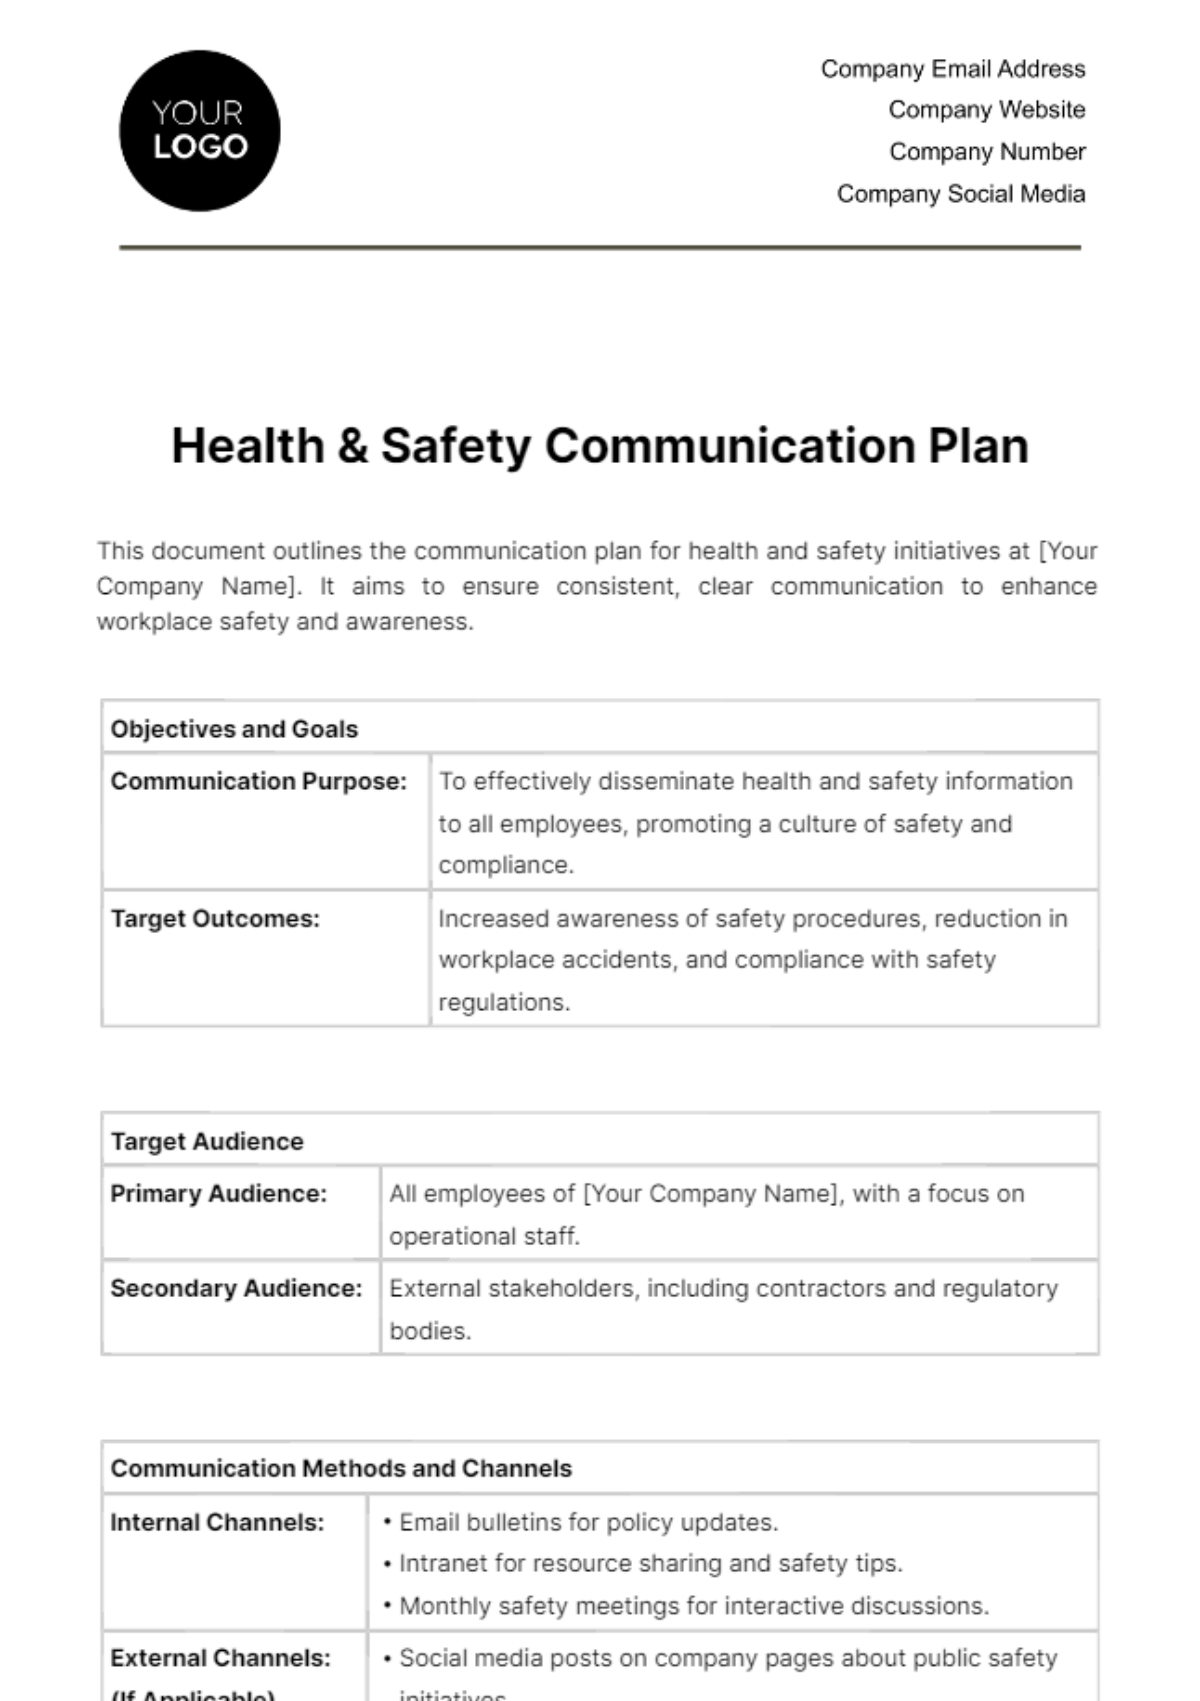 Free Health & Safety Communication Plan Template